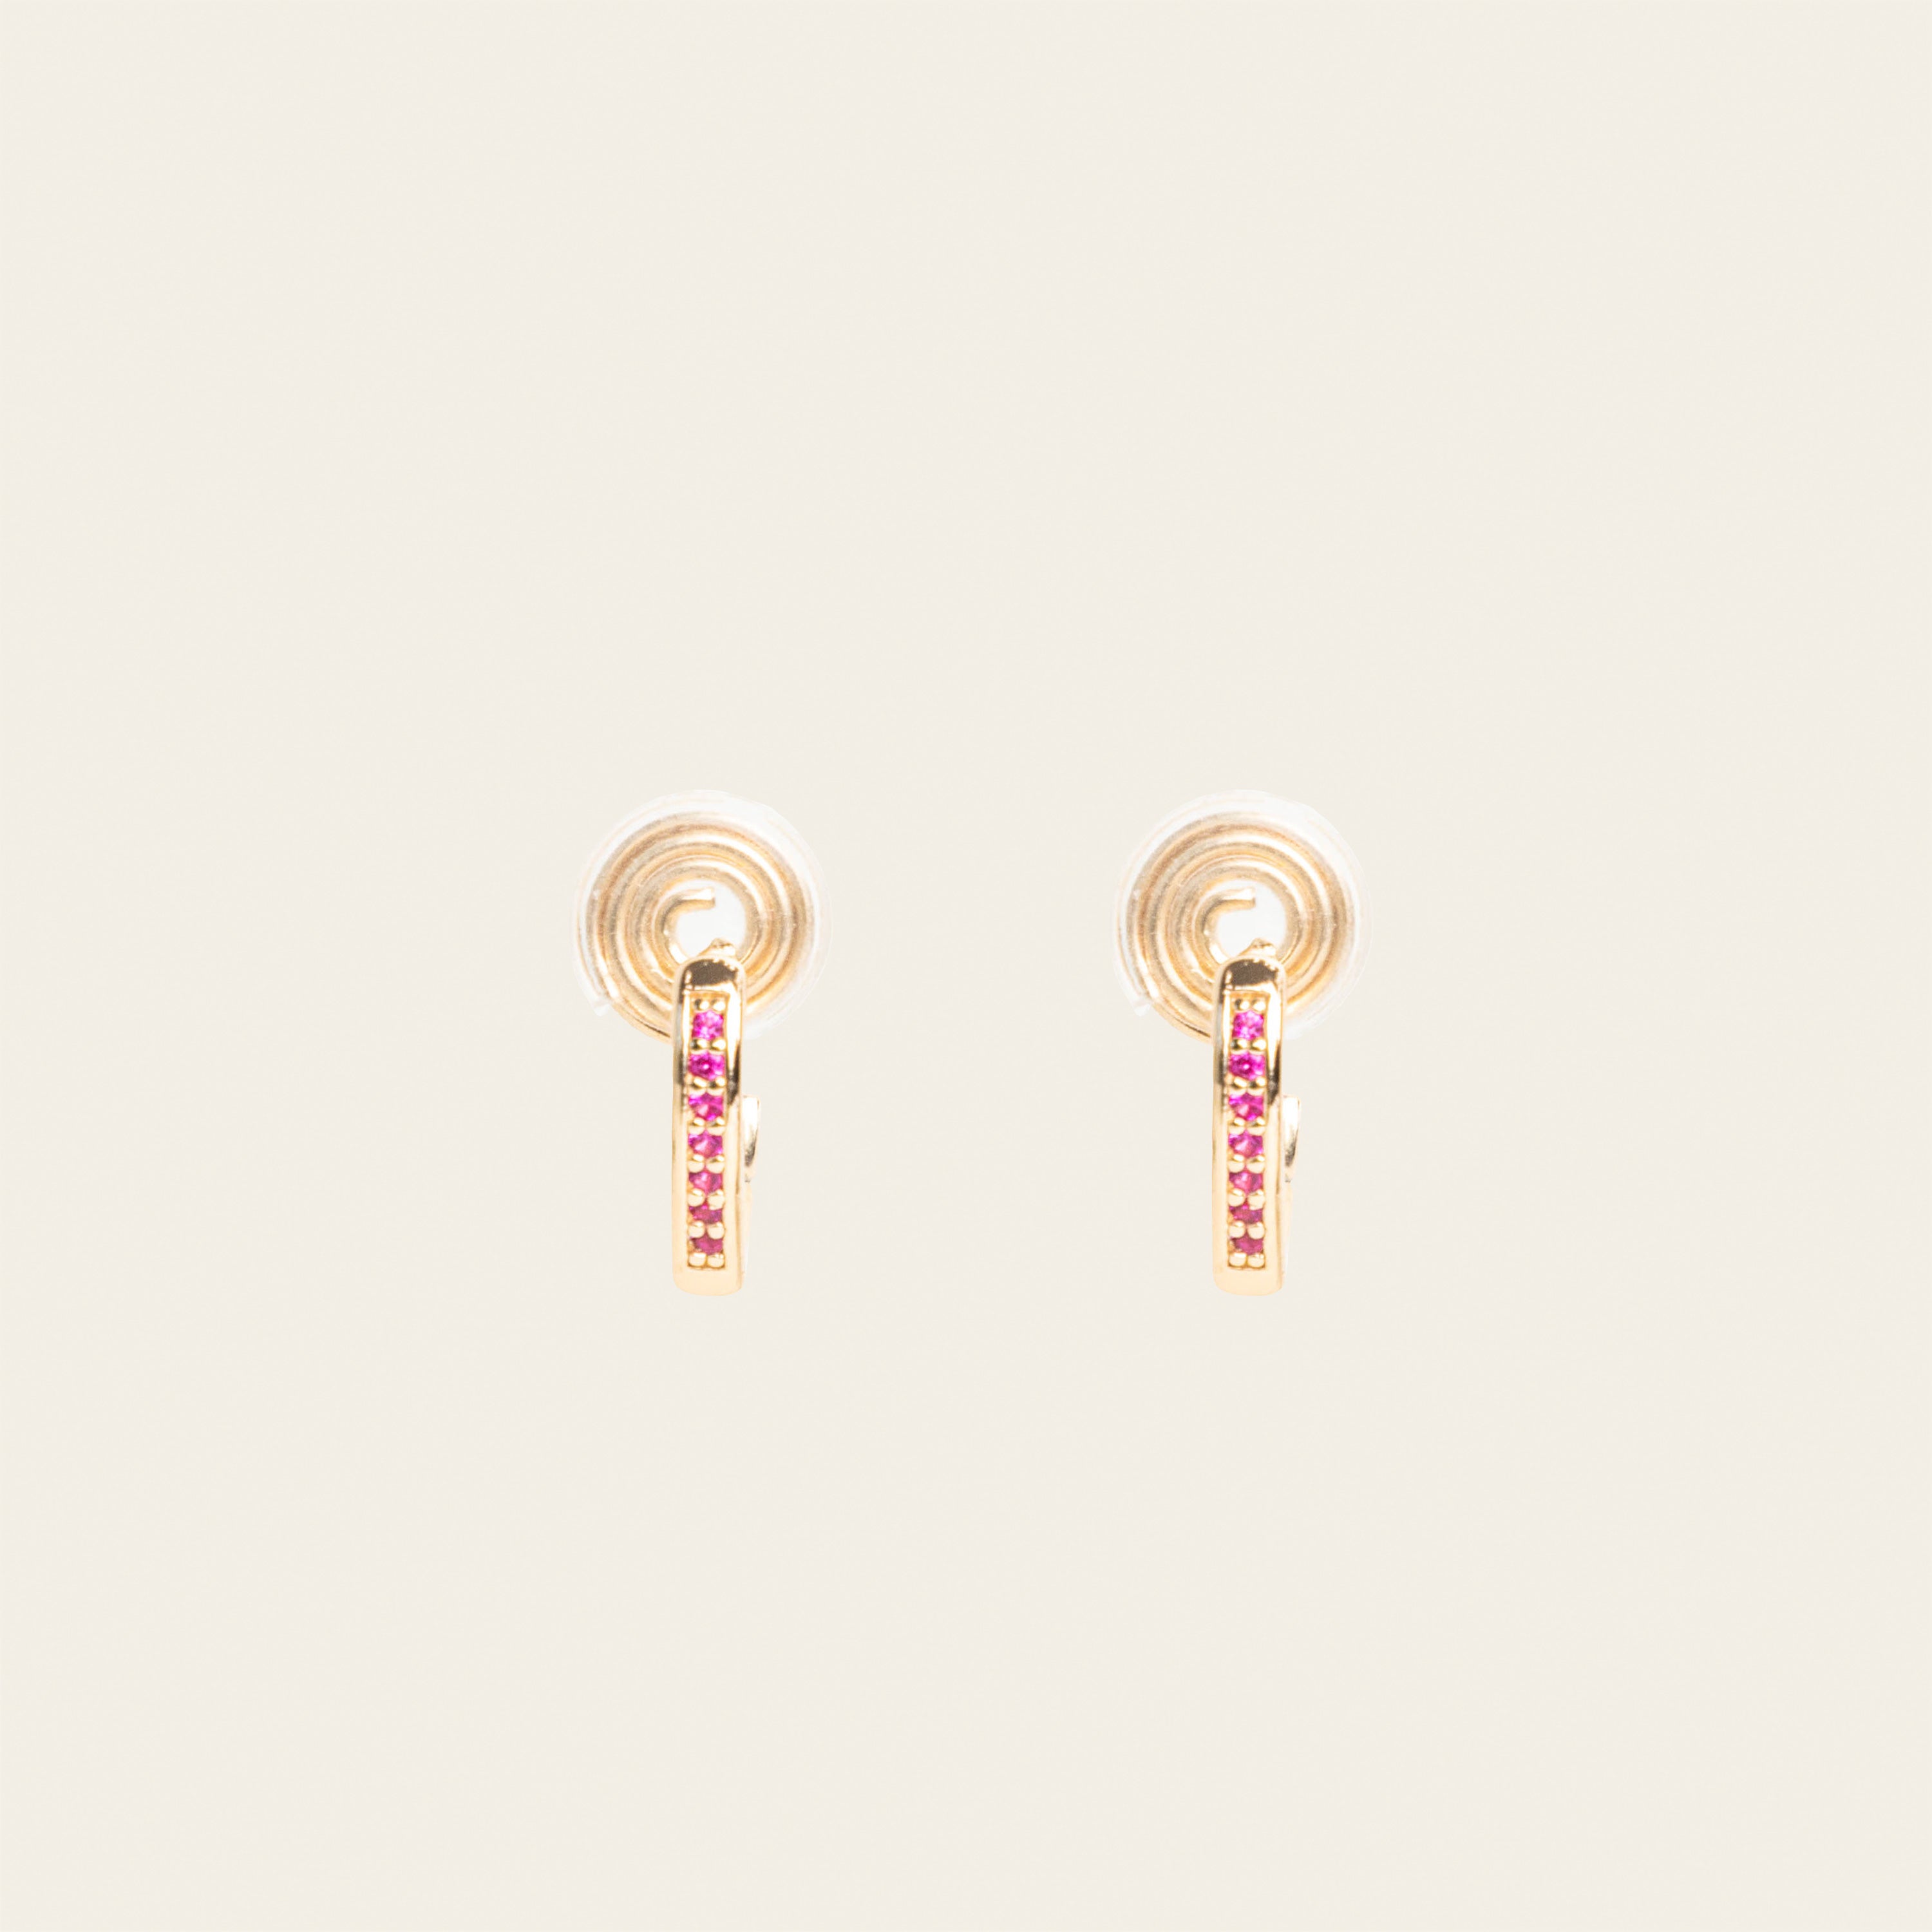 Image of the Alex Clip On Earrings. These versatile earrings offer a comfortable, secure 24-hour hold and adjustable fit for all ear types. Perfect for sensitive or stretched ears, they add a touch of elegance to any look.